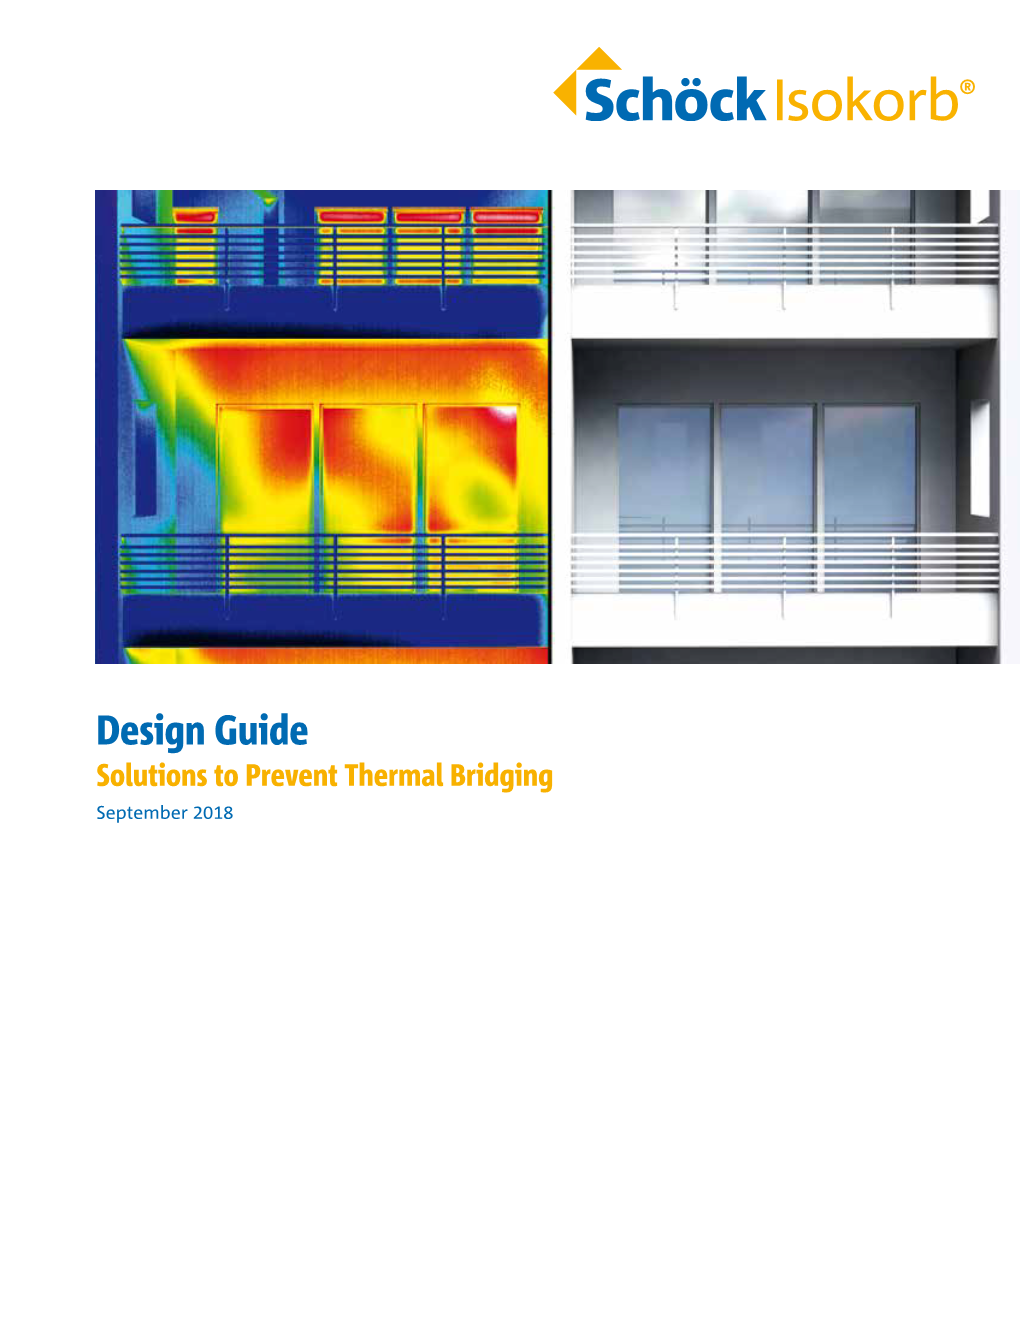 Design Guide: Solutions to Prevent Thermal Bridging September 2018 1